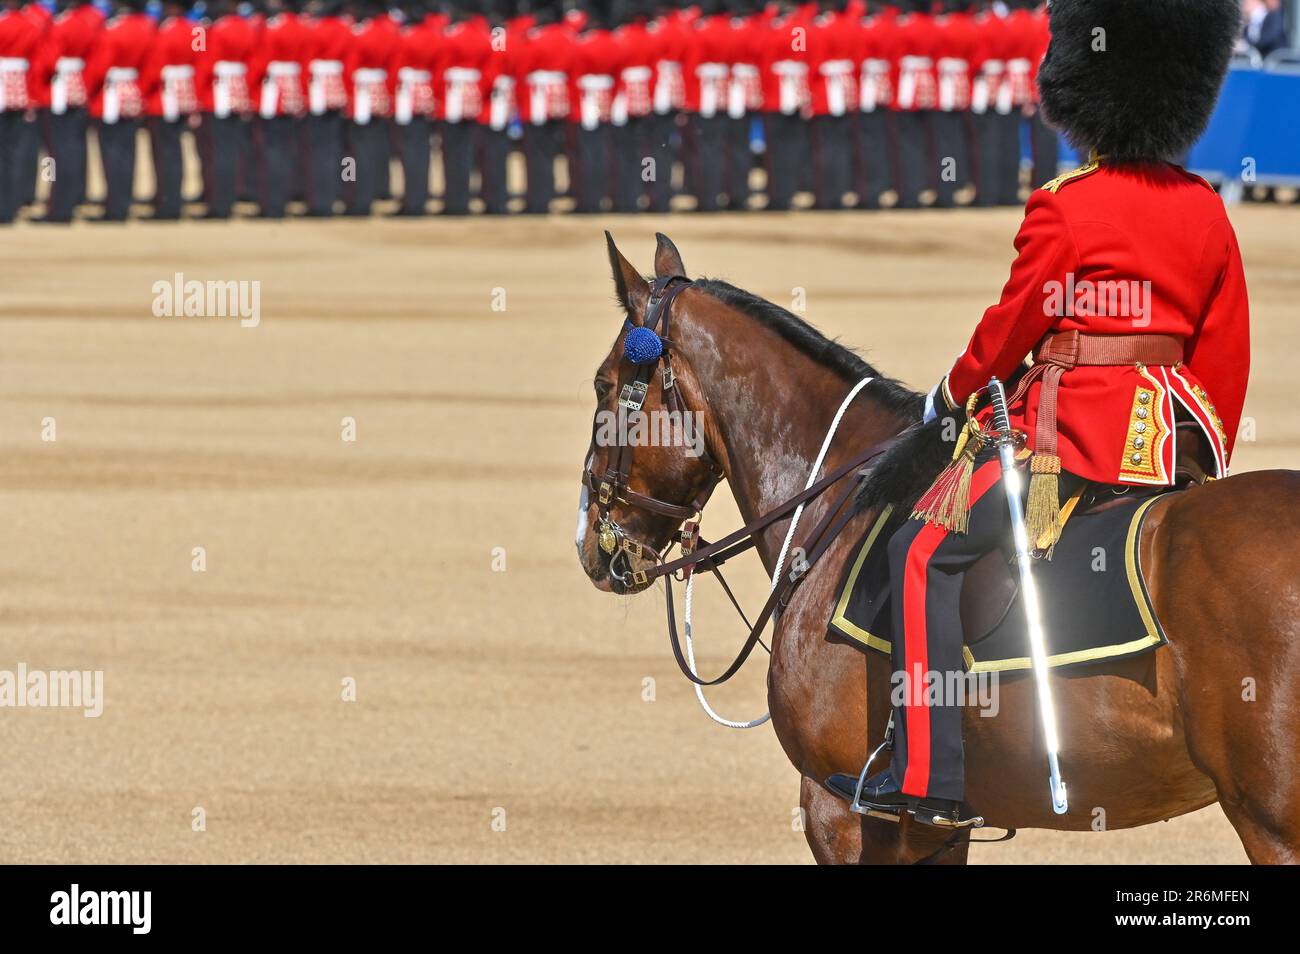 Horse Guards Parade, London, UK on June 10 2023. An officer looks on as HRH Prince William, The Prince of Wales reviews the regiments of the Household Divisions as the Regimental Colonel of the Welsh Guards during the Trooping the Colour at Horse Guards Parade, London, UK on June 10 2023. The Divisions on Parade include, the Foot guards; The Grenadier Guards, The Coldstream Guards, The Scots Guards, The Irish Guards, The Welsh Guards, with the Household Cavalry Mounted Regiment made up of The Life Guards and The Blues and Royals who together provide the Sovereign's Escort. Credit: Francis Knig Stock Photo